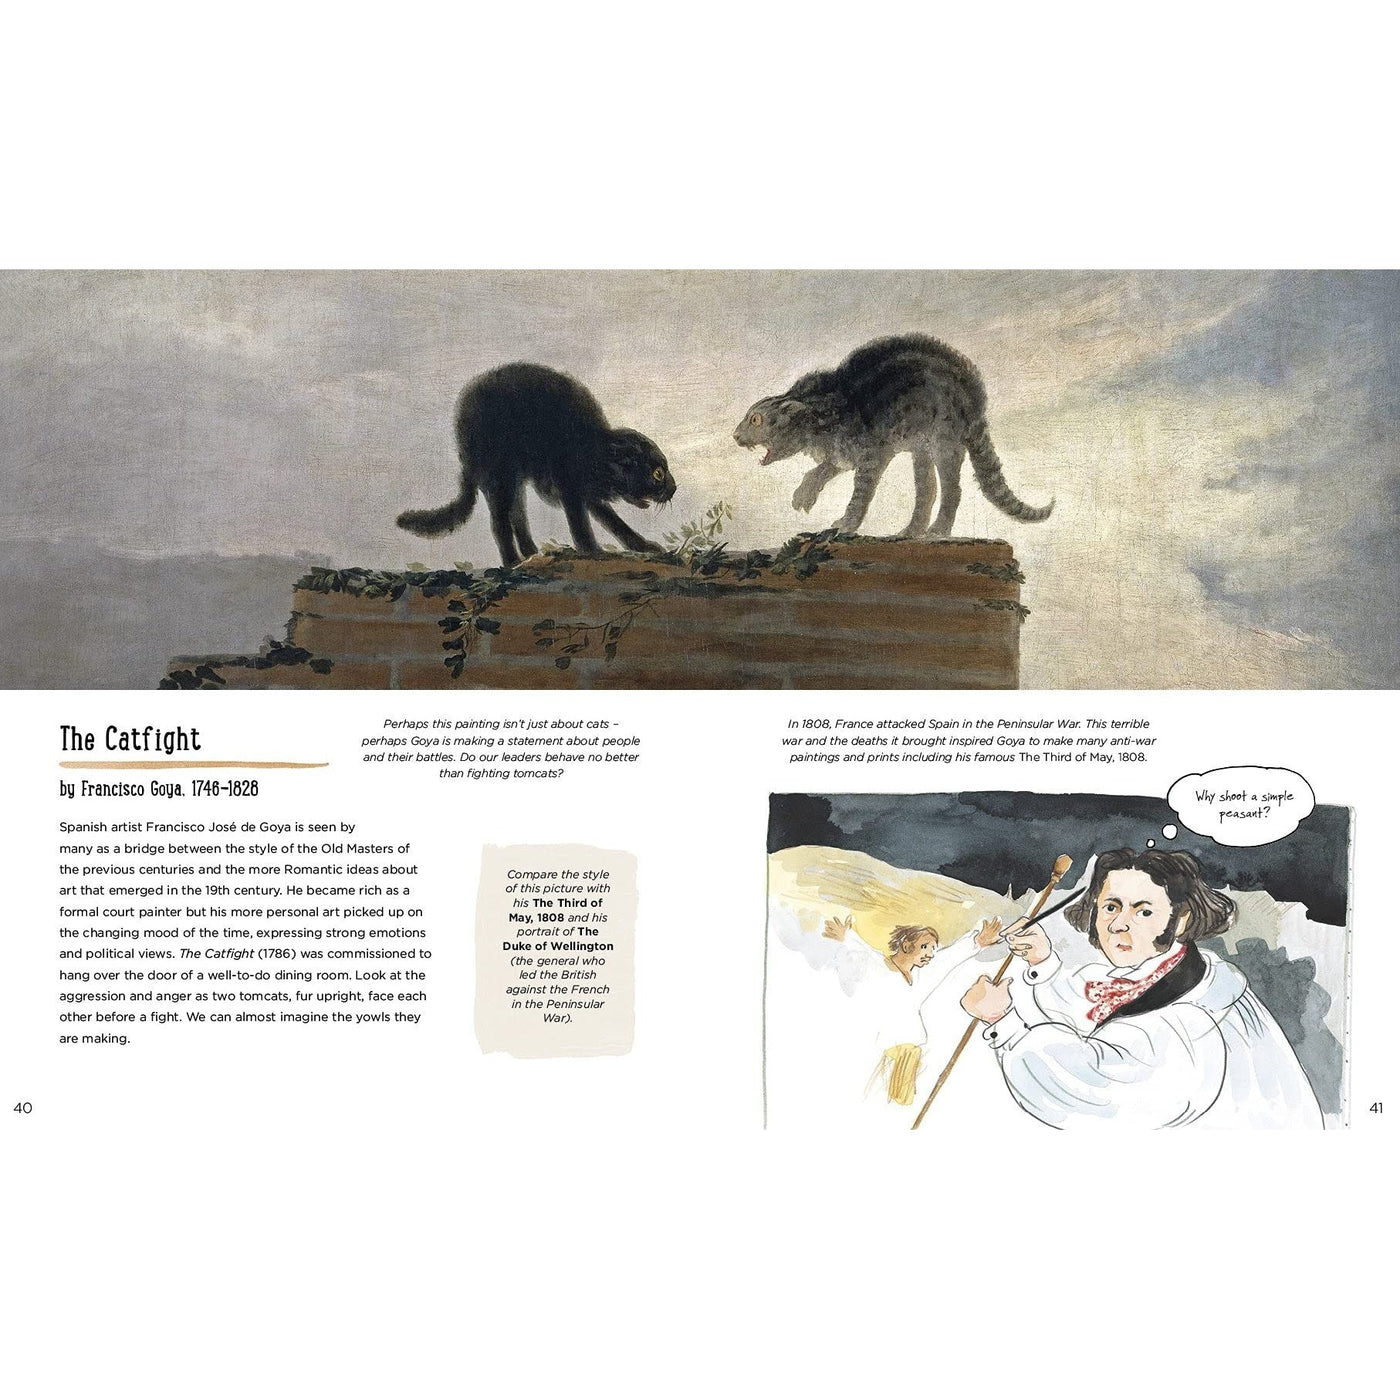 The Story Of Paintings: A History Of Art For Children - Mick Manning & Brita Granstroem